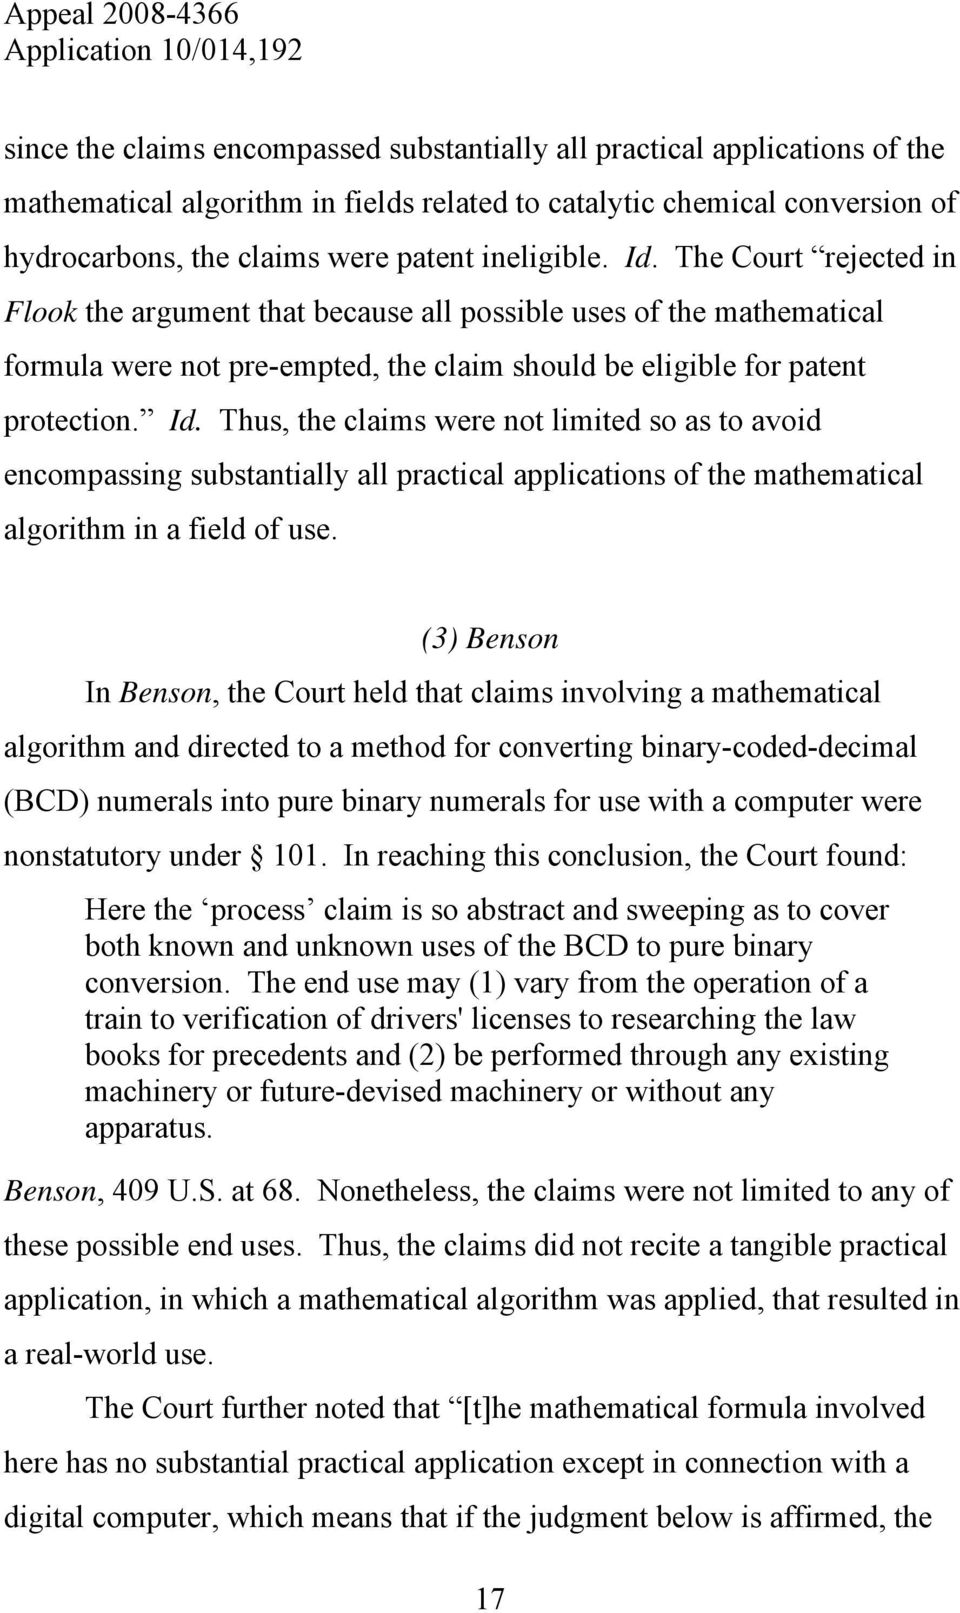 (3) Benson In Benson, the Court held that claims involving a mathematical algorithm and directed to a method for converting binary-coded-decimal (BCD) numerals into pure binary numerals for use with